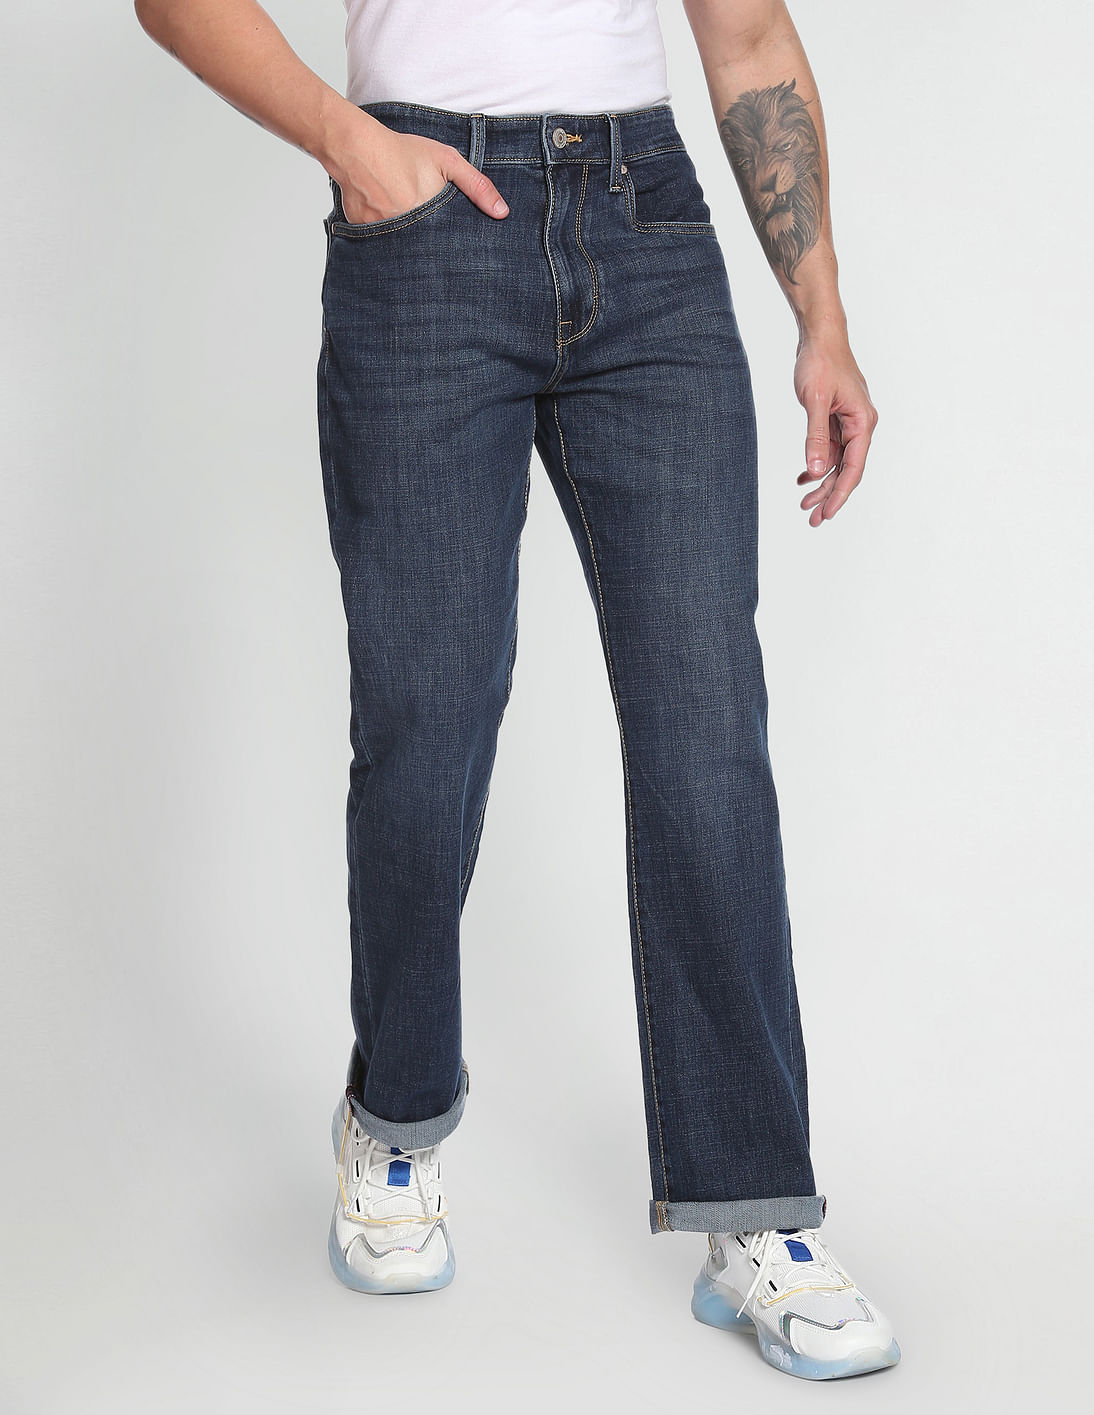 Buy Flying Machine Bootcut Classic Vintage Jeans - NNNOW.com